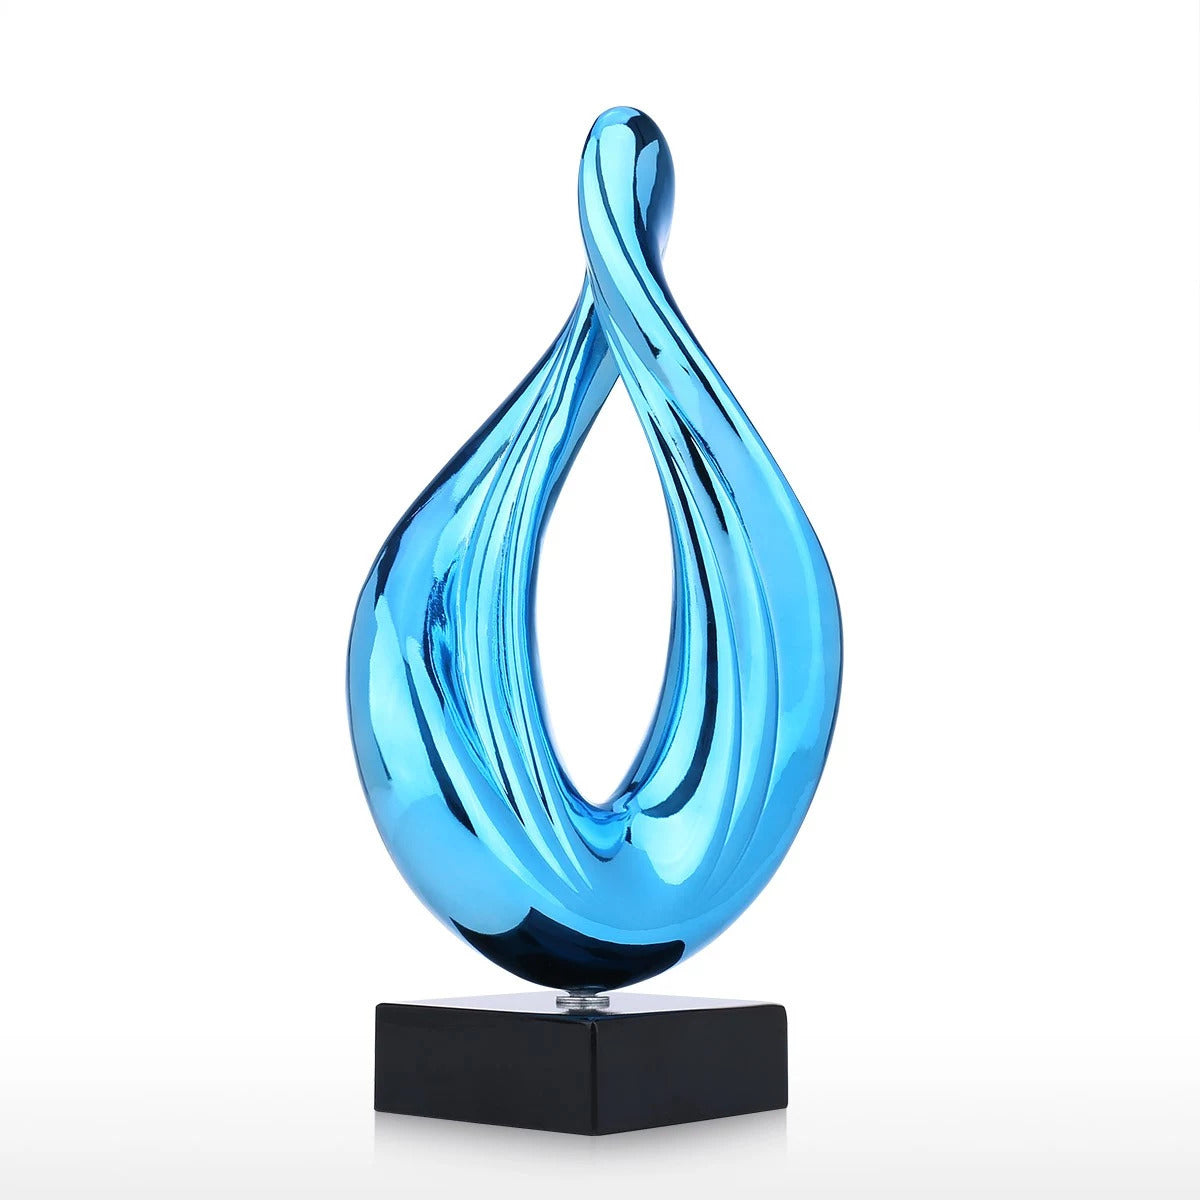 Abstract Sculpture by Resin to Blue Bedroom & Living Room Decor Home Accessories for Housewarming and New Home Gifts